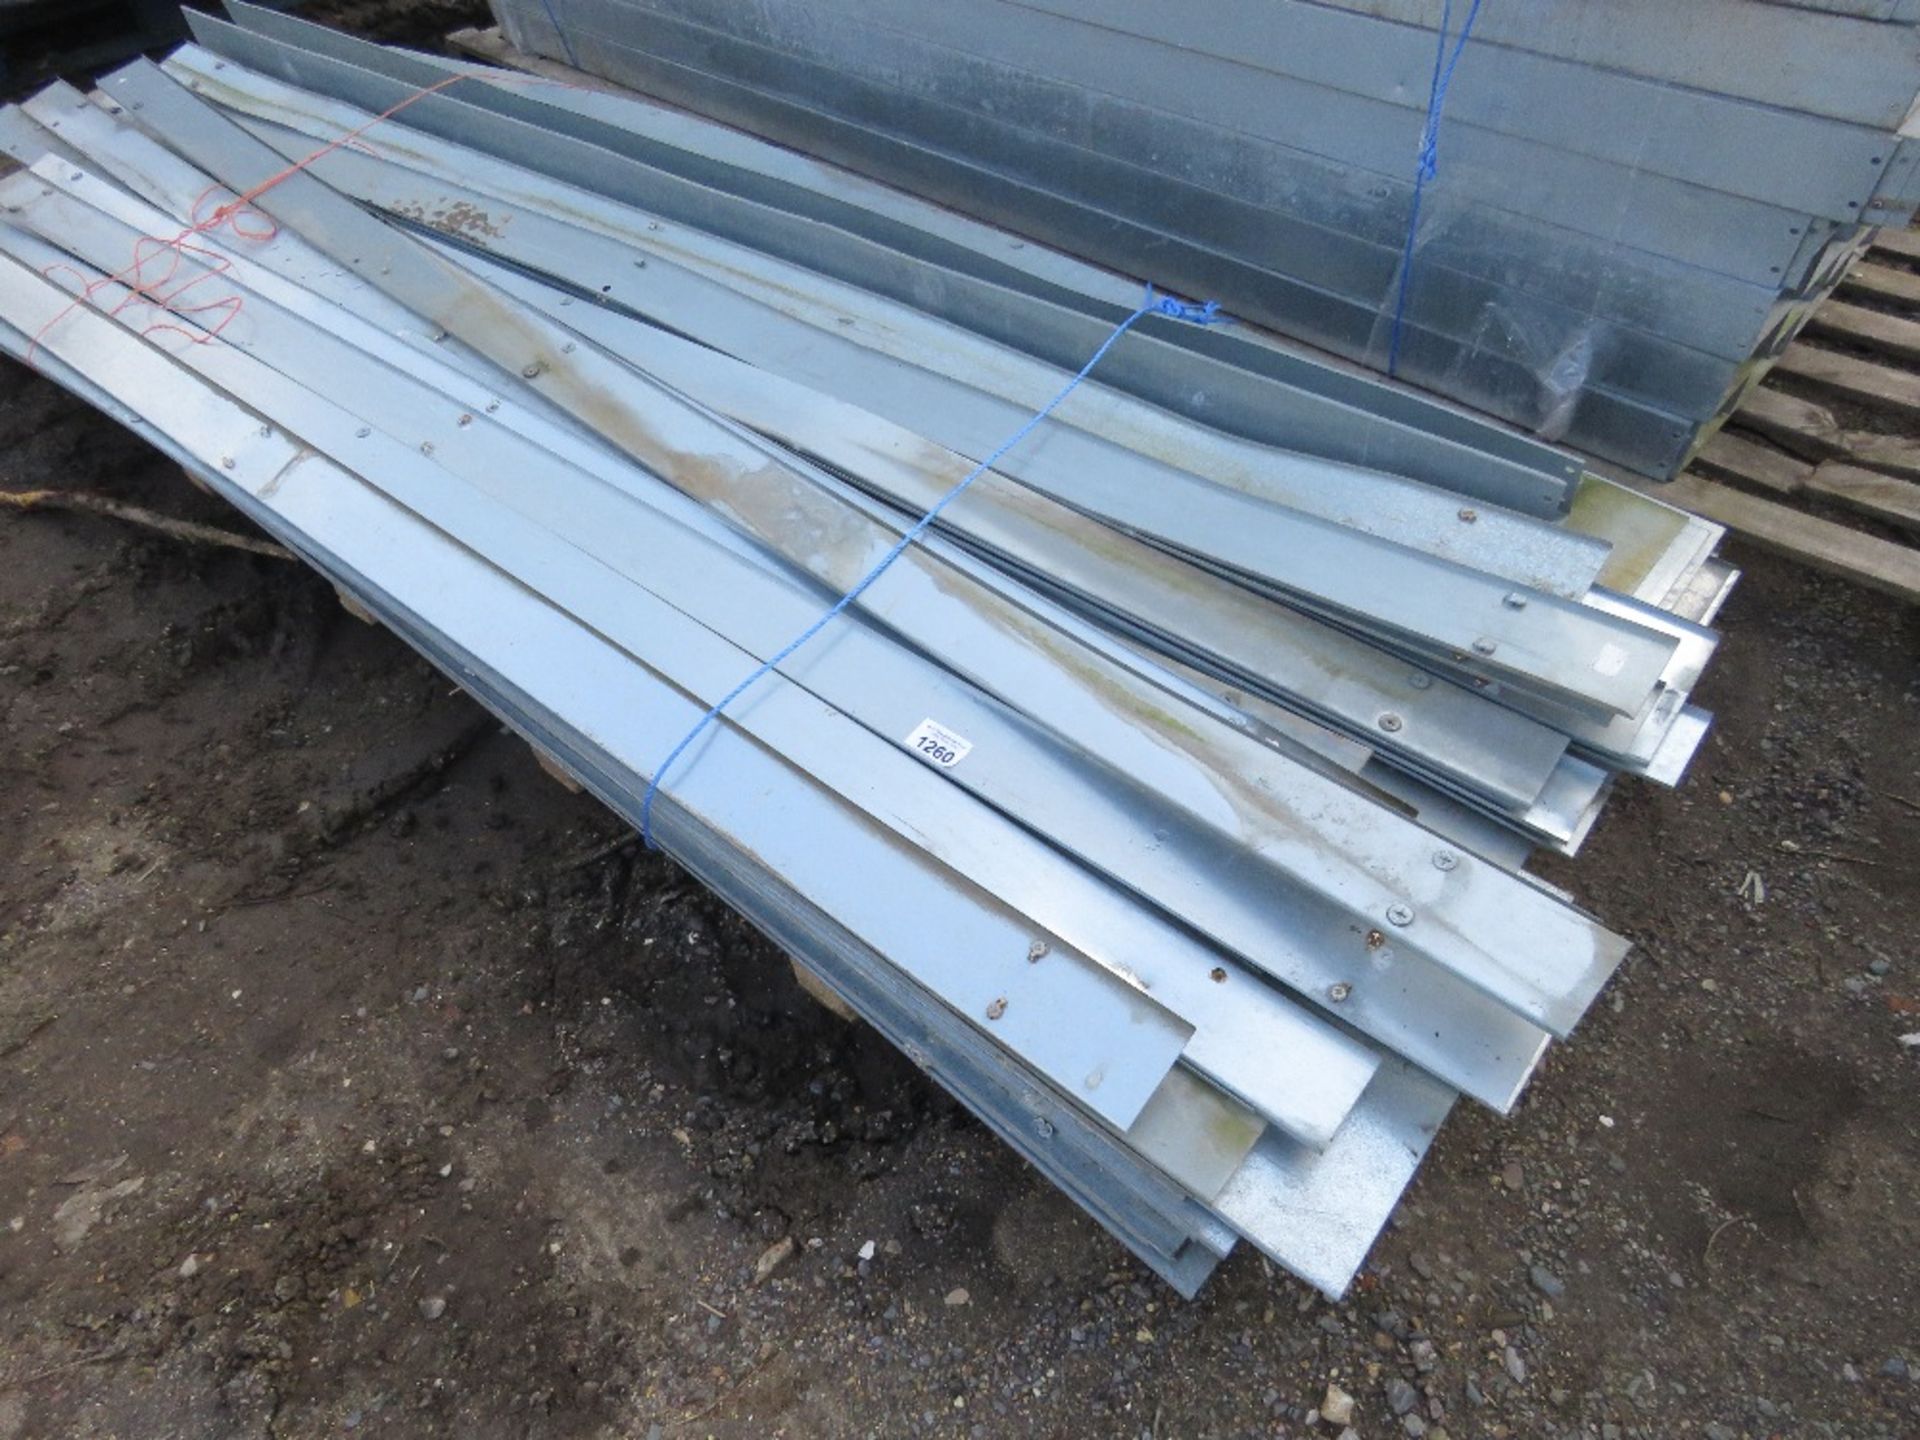 LARGE QUANTITY OF METAL DUCTING PARTS INCLUDING DUCTS AT 9FT LENGTH APPROX. SOURCED FROM COMPANY LIQ - Bild 2 aus 9